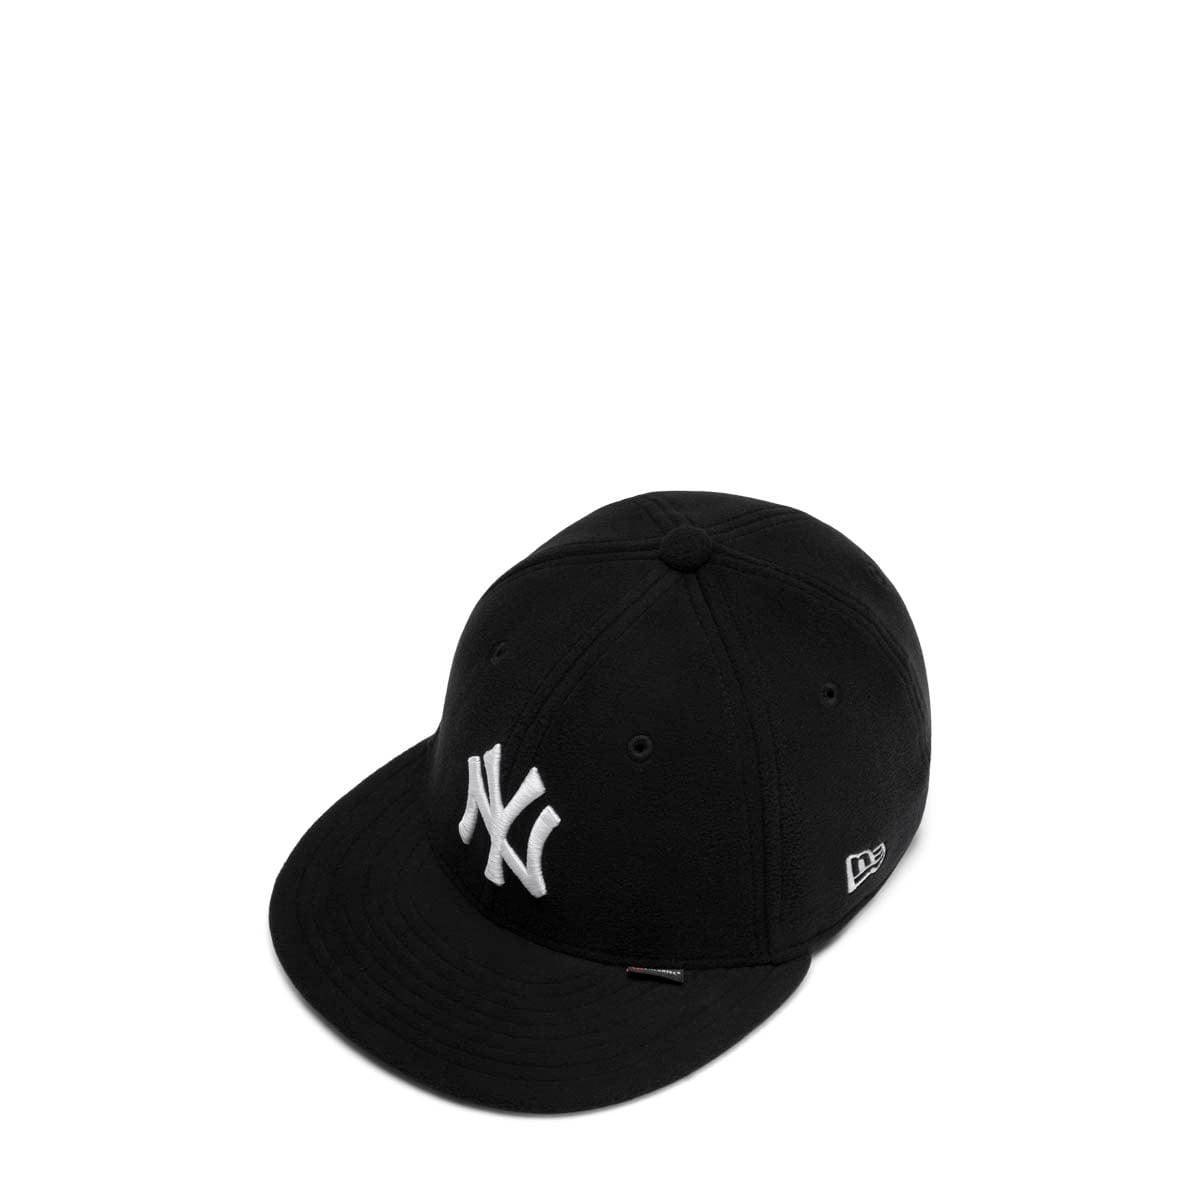 New York Yankees Polartec Black 59Fifty Fitted Hat by MLB x New Era